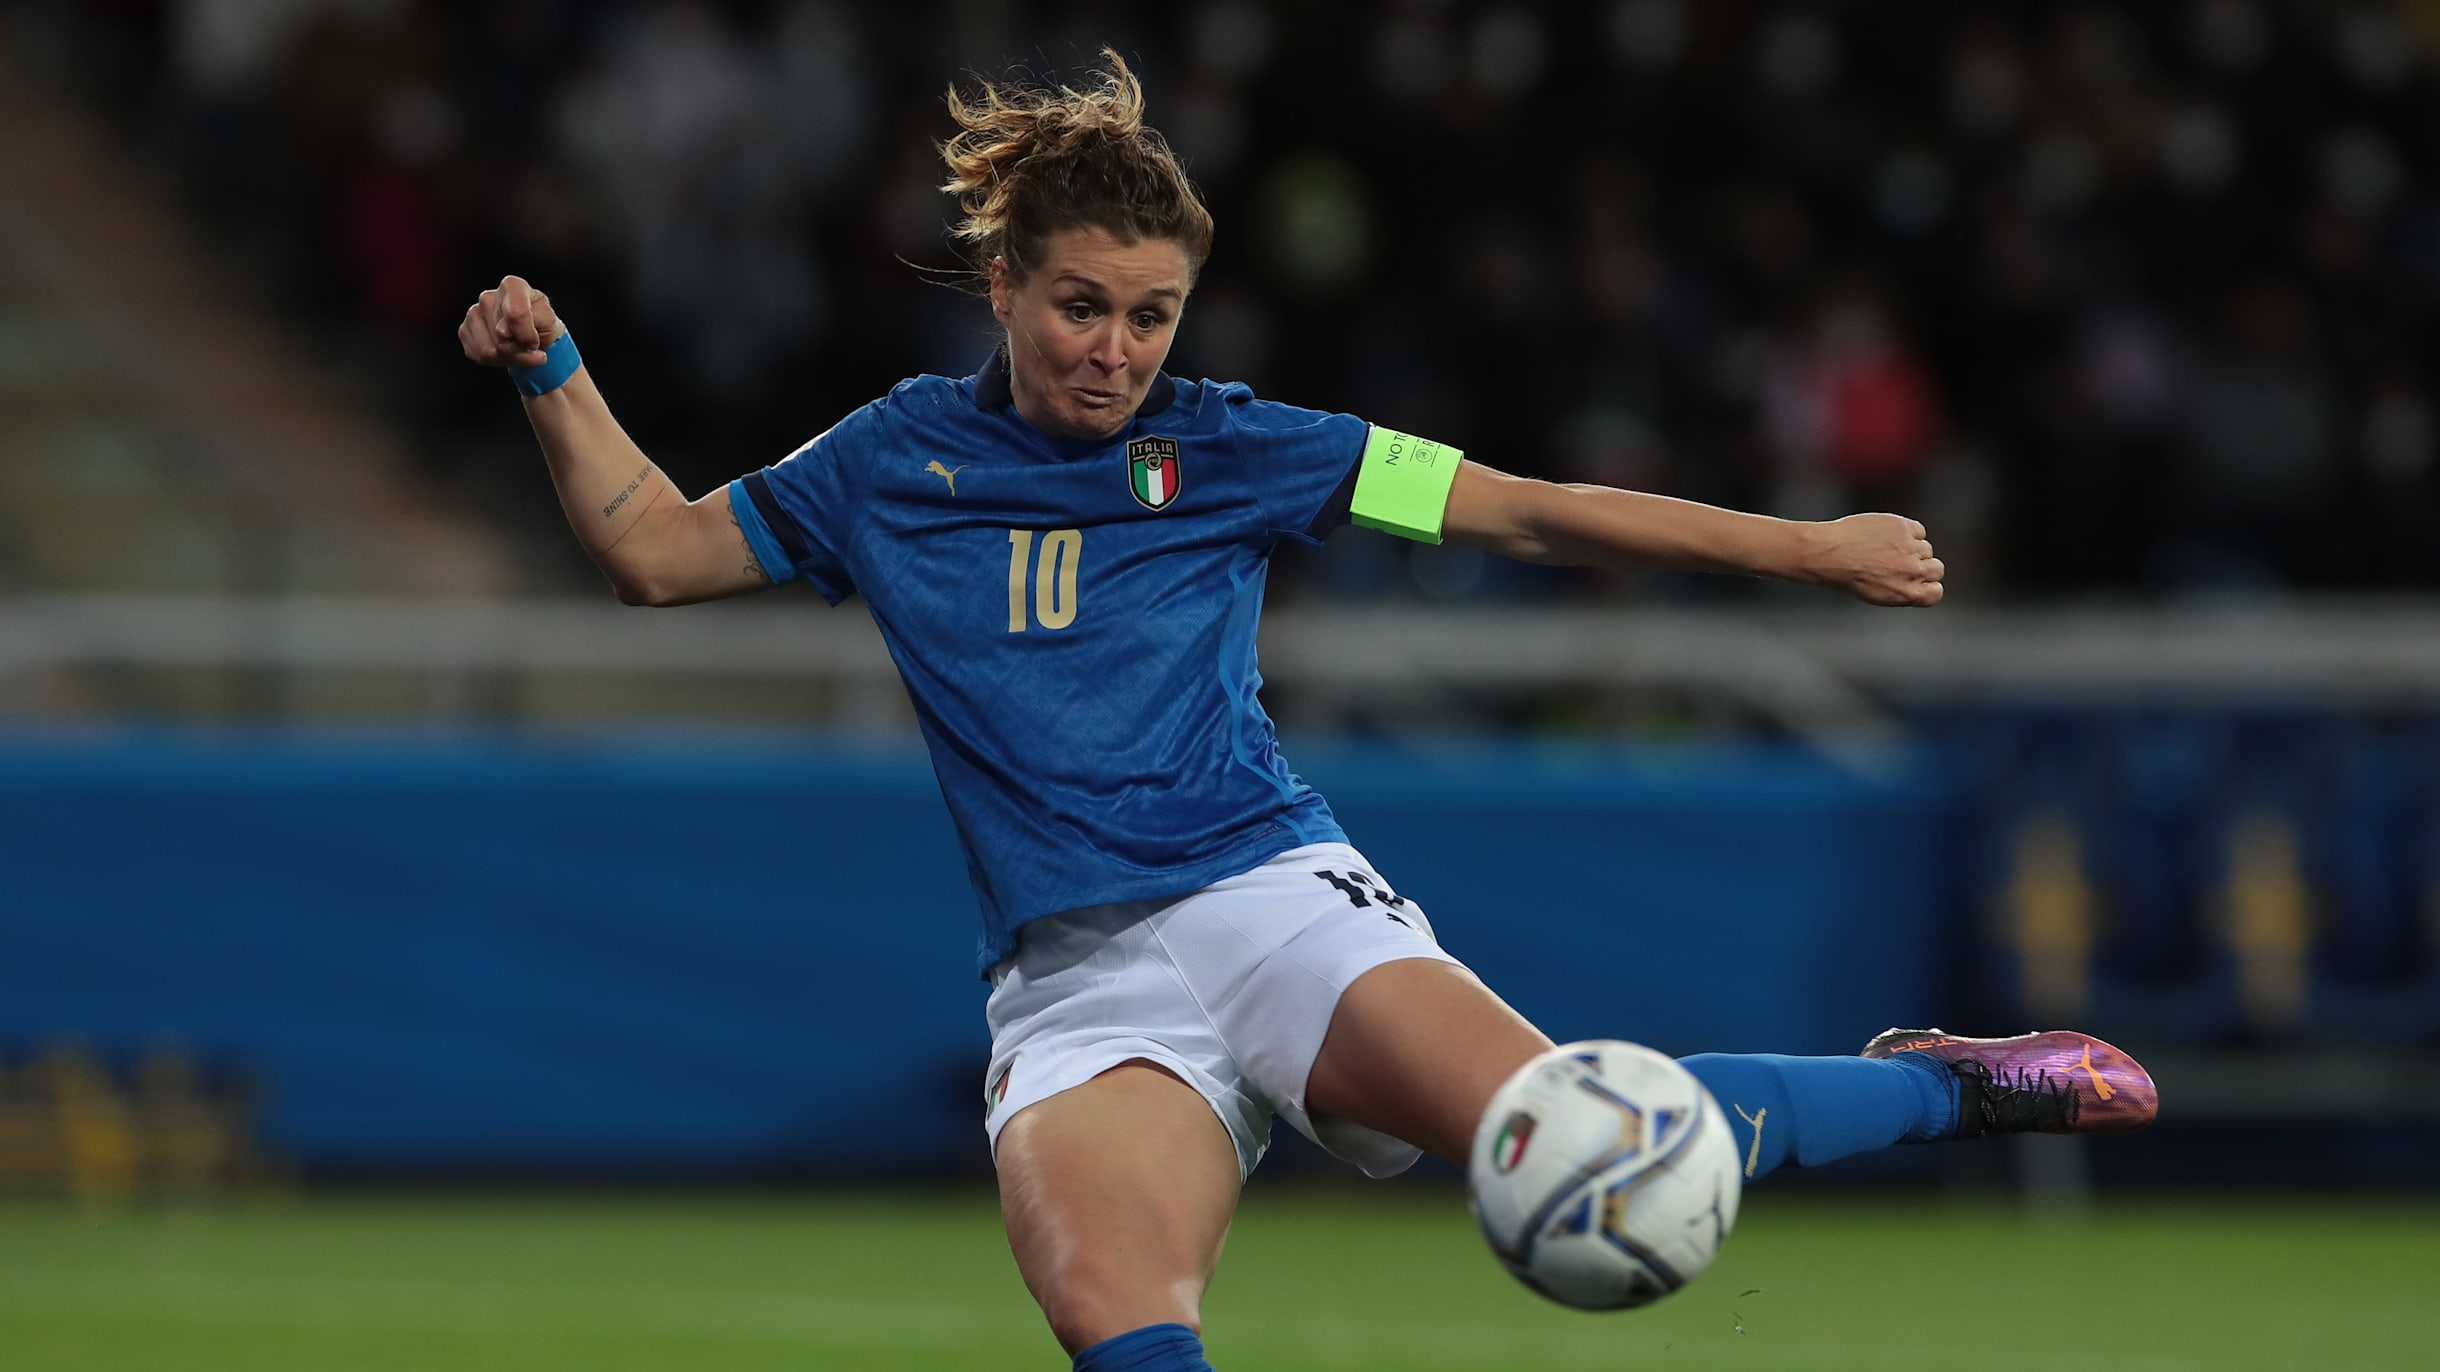 Women's Serie A To Kick Off Italy's First-Ever Professional Sports League  For Female Athletes In 2022